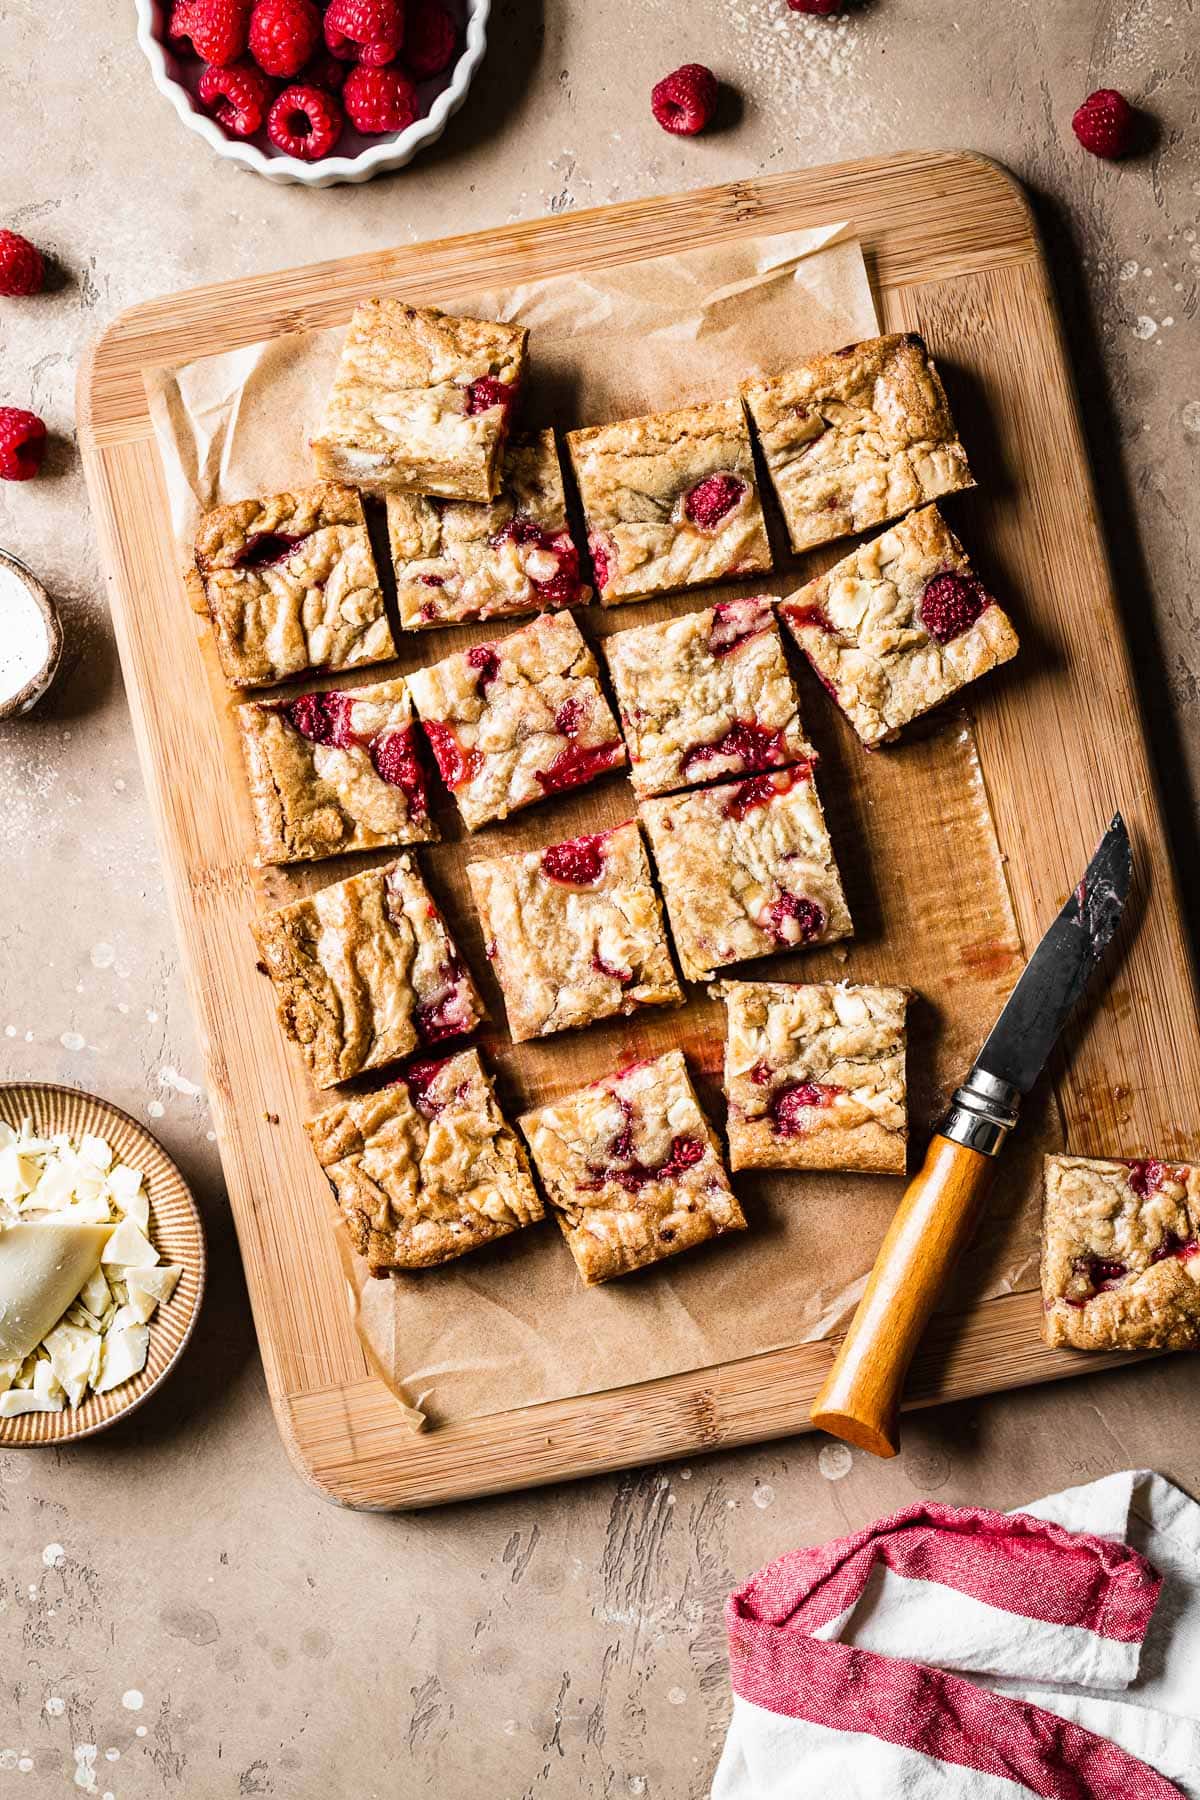 Raspberry and white chocolate blondies cut into squares on a wooden cutting board, surrounded by ingredients, a knife and a white and red napkin.